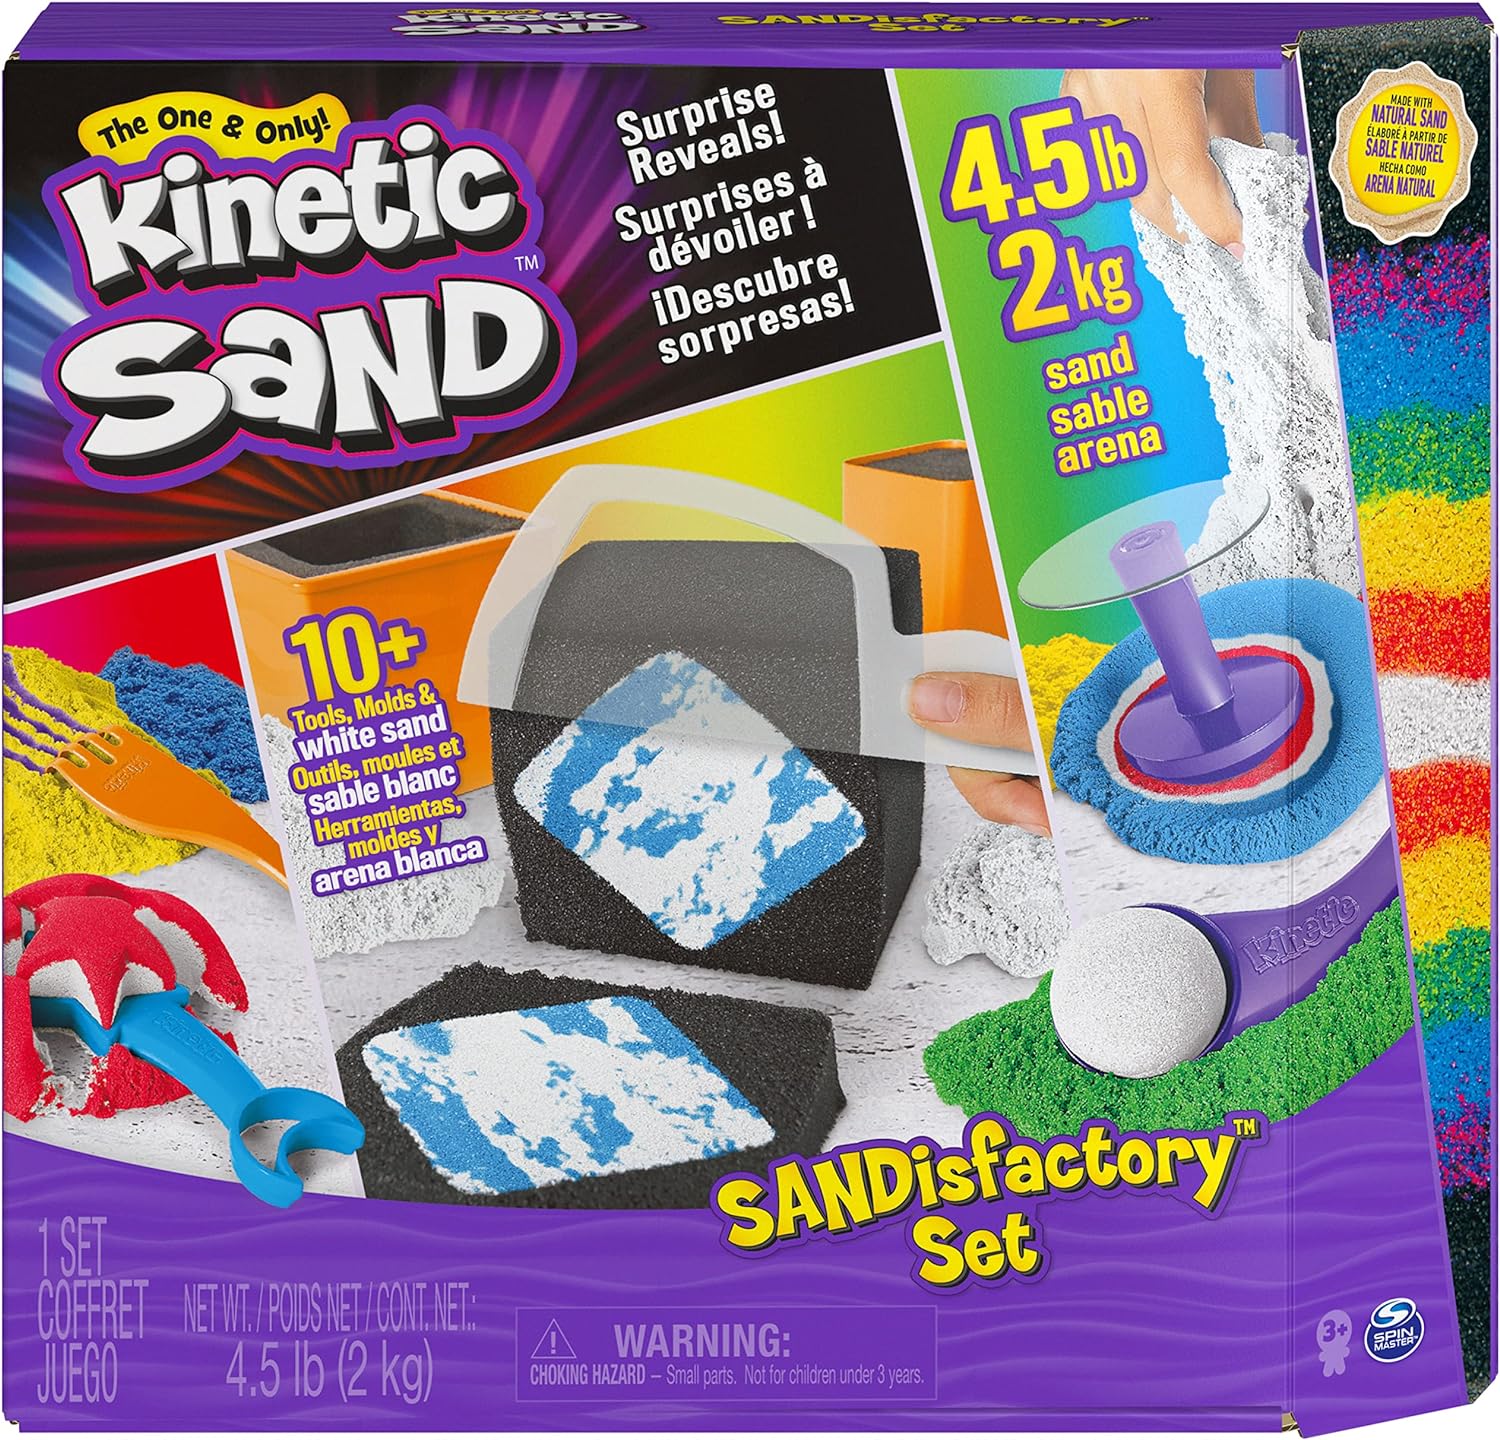 Kinetic Sand Sandisfactory Large Playset (w/ 4.5-Lbs of Sand & 10 Tools) $15 + Free Shipping